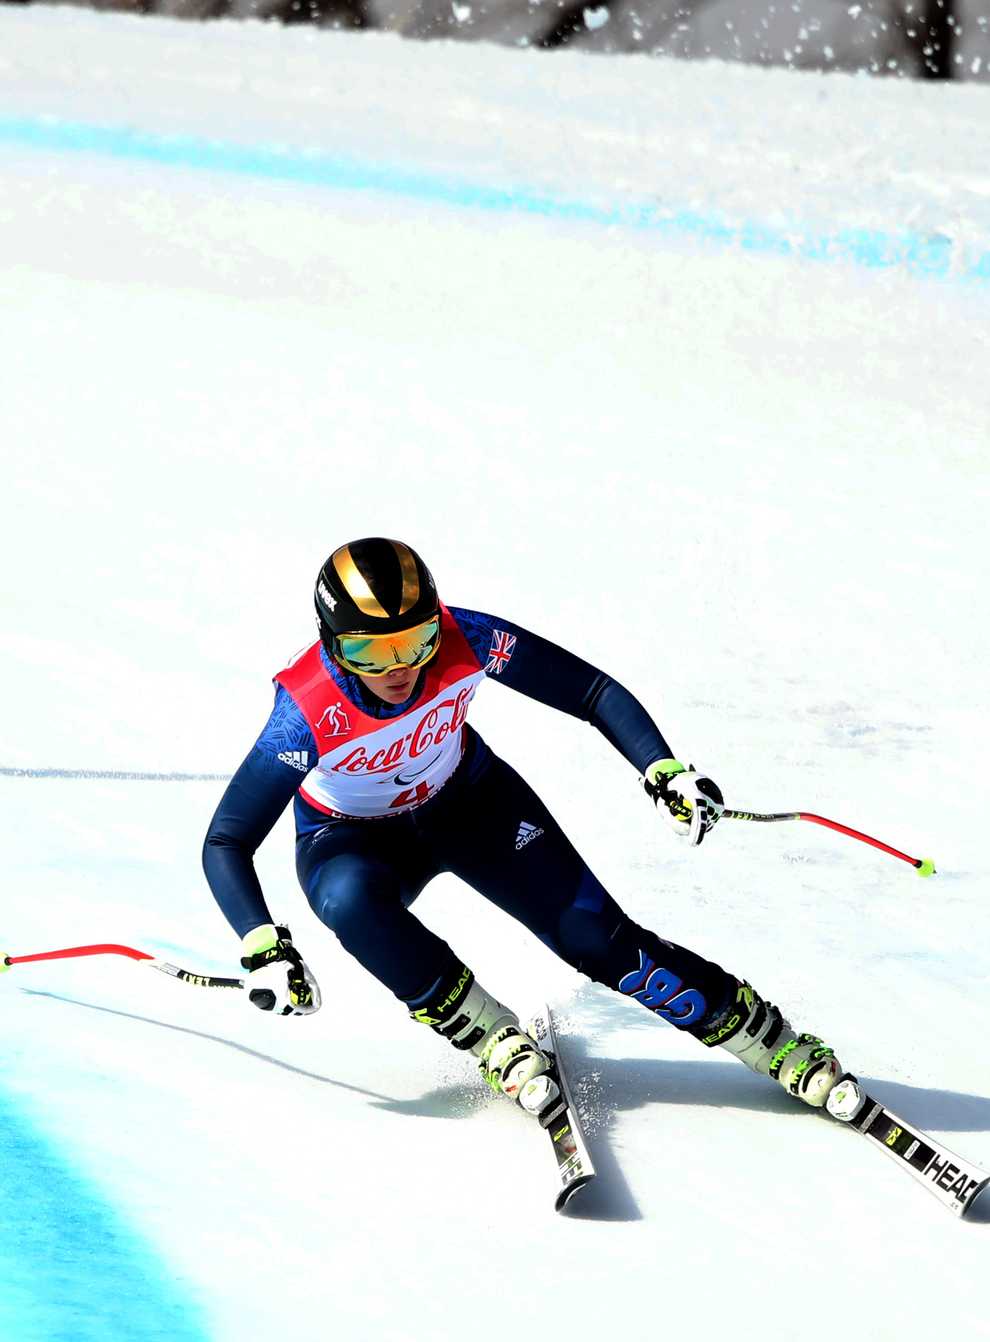 Millie Knight on her way to Paralympic silver in the women's downhill in Sochi 2018 (PA Images)